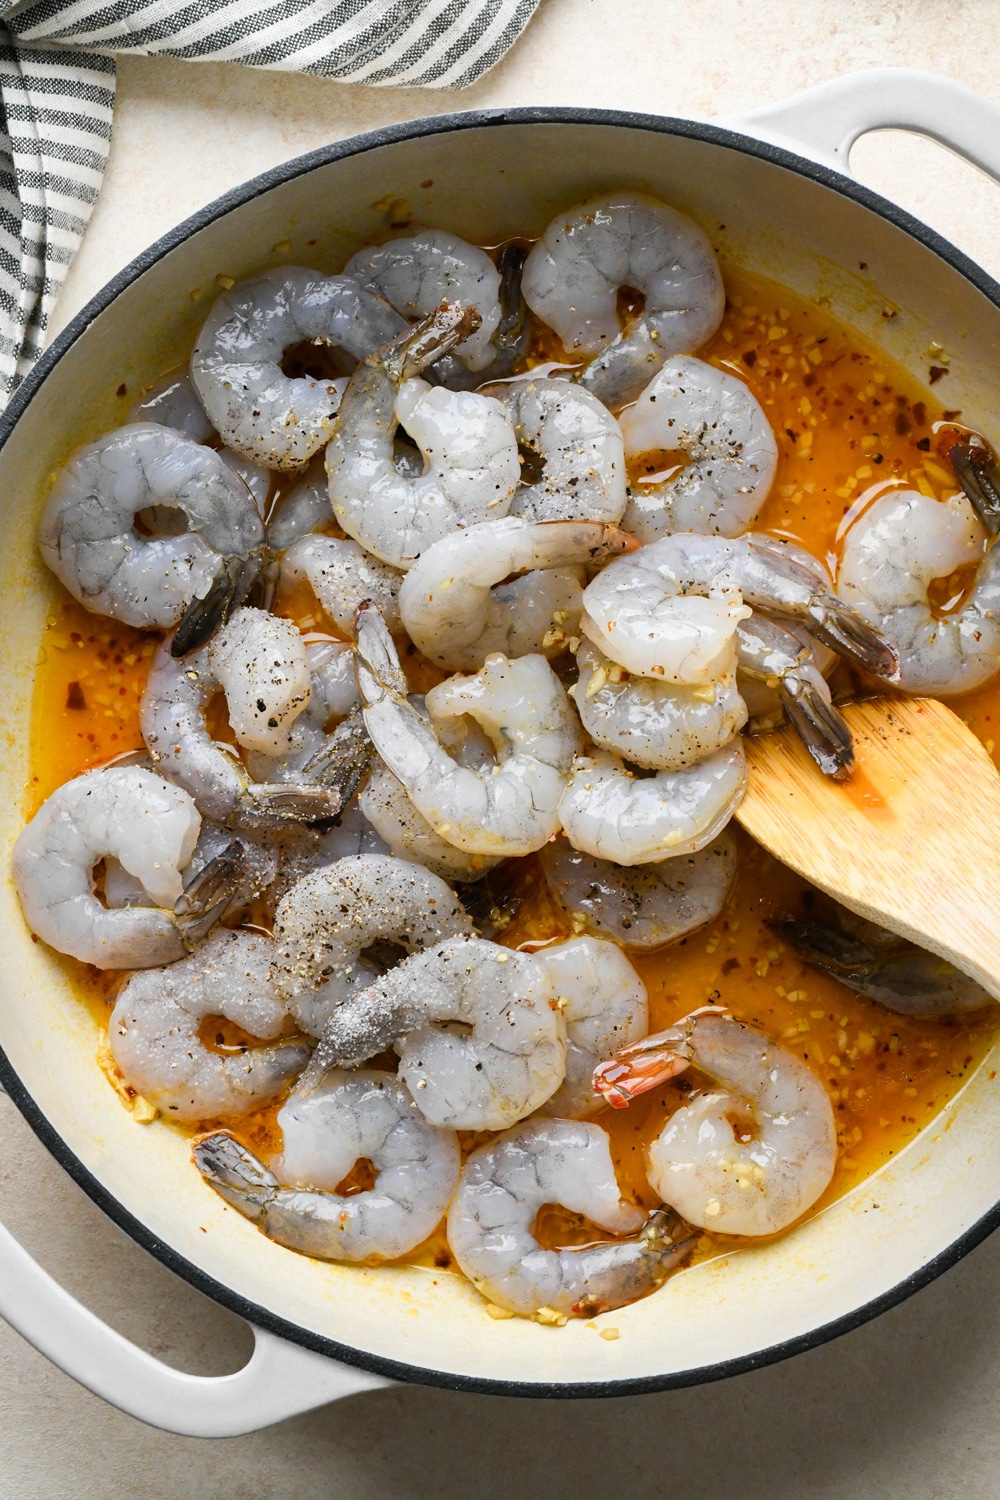 How to make Shrimp Scampi Without Wine: Raw shrimp in the skillet with salt and pepper.